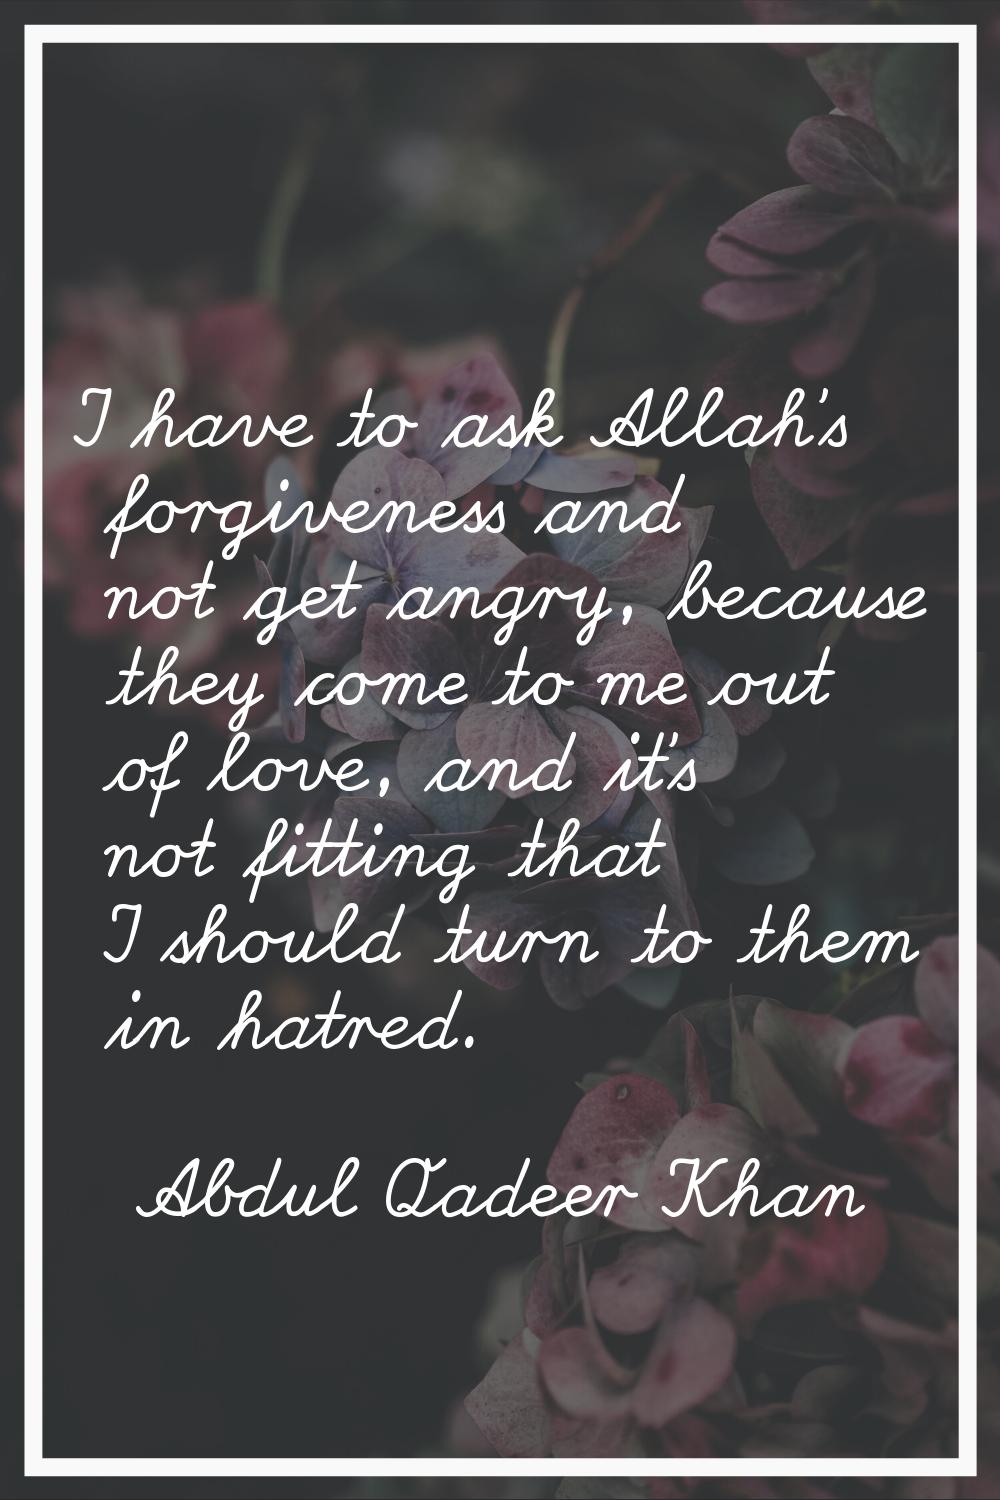 I have to ask Allah's forgiveness and not get angry, because they come to me out of love, and it's 